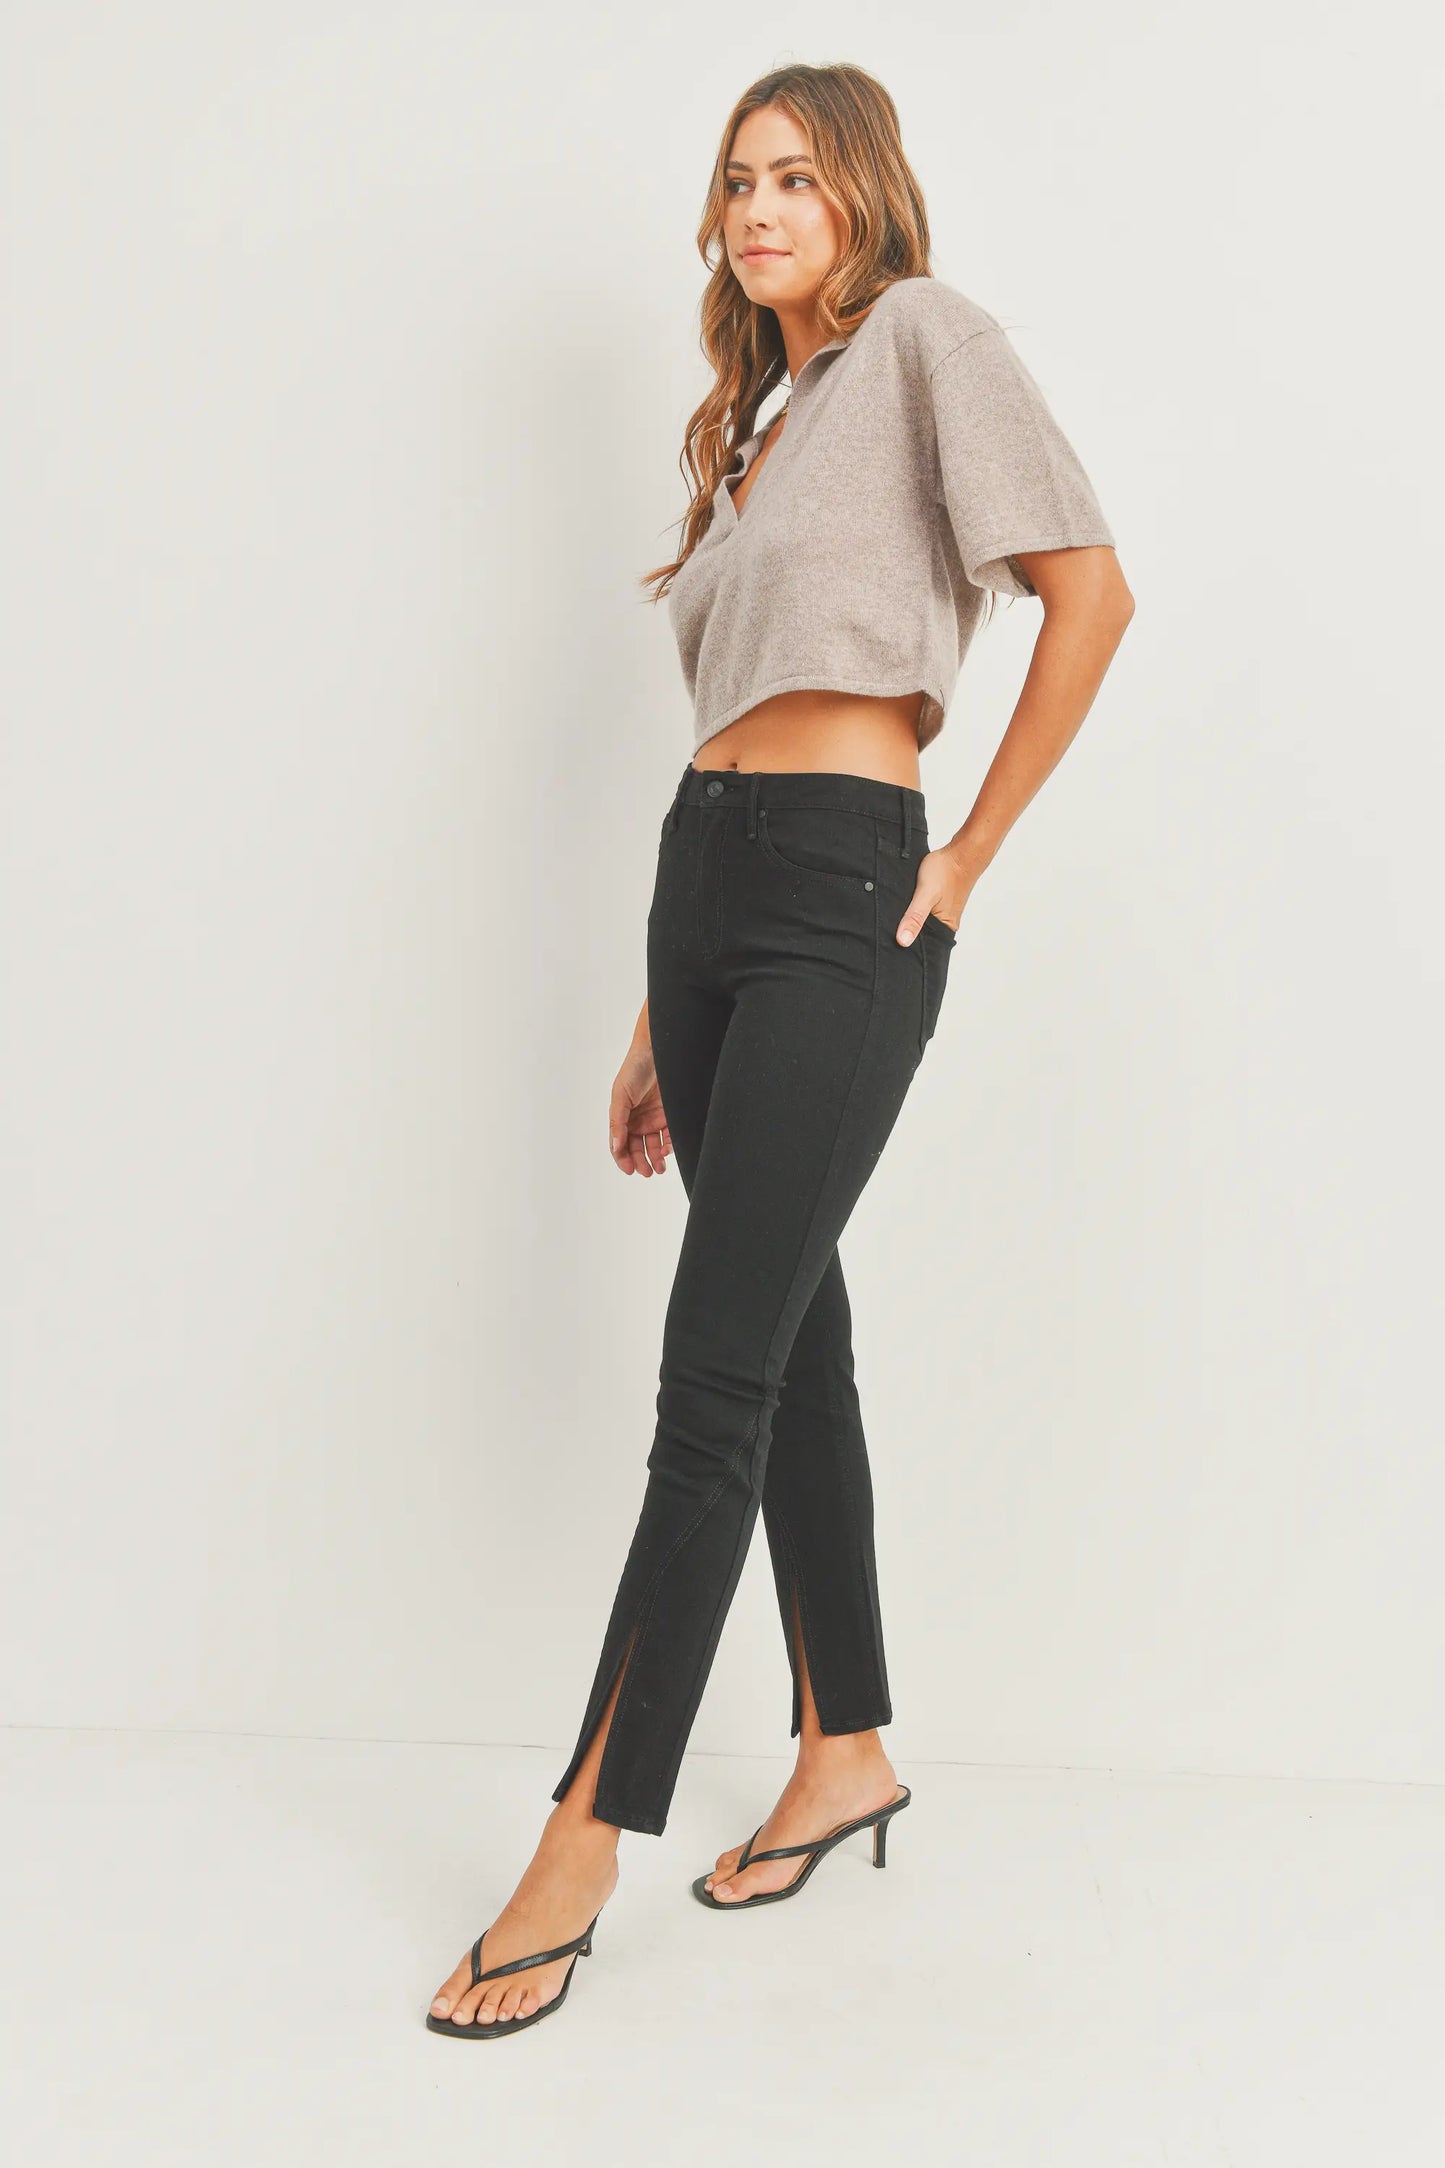 Elevate your denim game with the JUST BLACK DENIM Mid Rise - Split Hem Slim Jeans. The mid rise design offers a flattering fit that sits comfortably on your hips, creating a sleek and modern silhouette that effortlessly complements your shape. 10.5" rise and a 30" inseam. The 7" split hem adds a dash of flair and timeless appeal. Pair these jeans with your favorite heels for an elevated look, or embrace a more laid-back vibe with sneakers or ankle boots. 